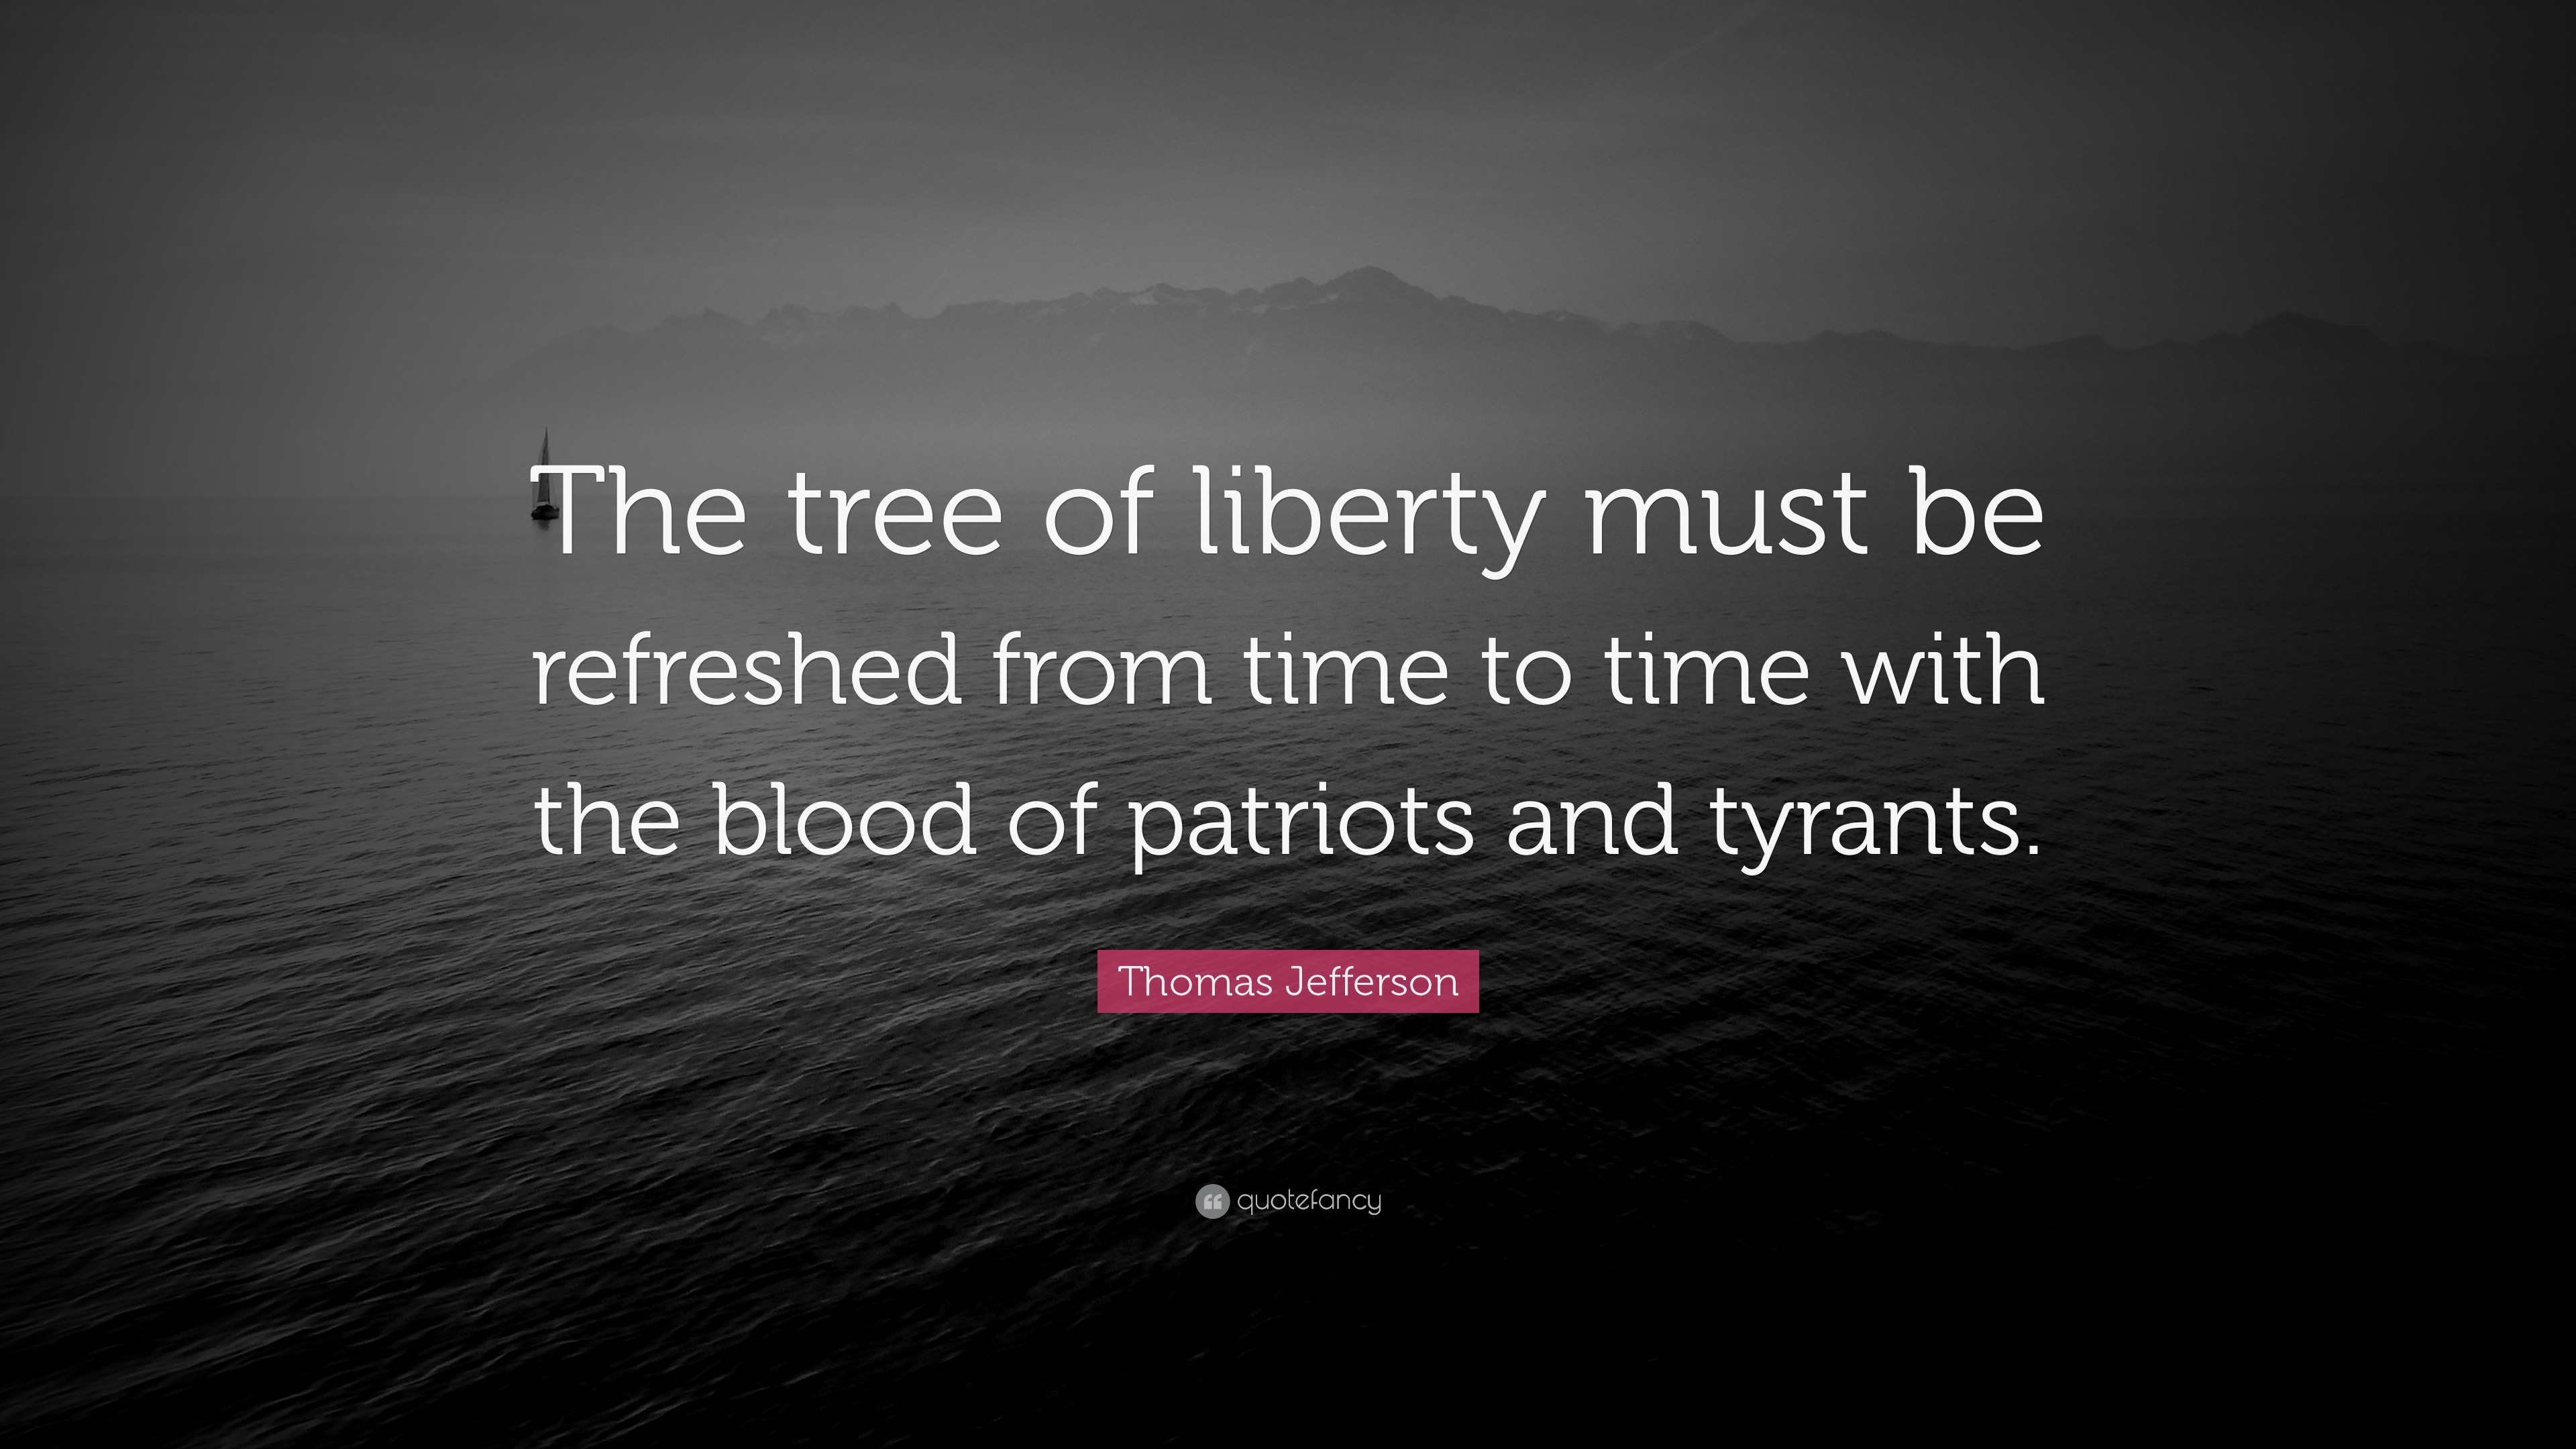 34917 Thomas Jefferson Quote The tree of liberty must be refreshed from